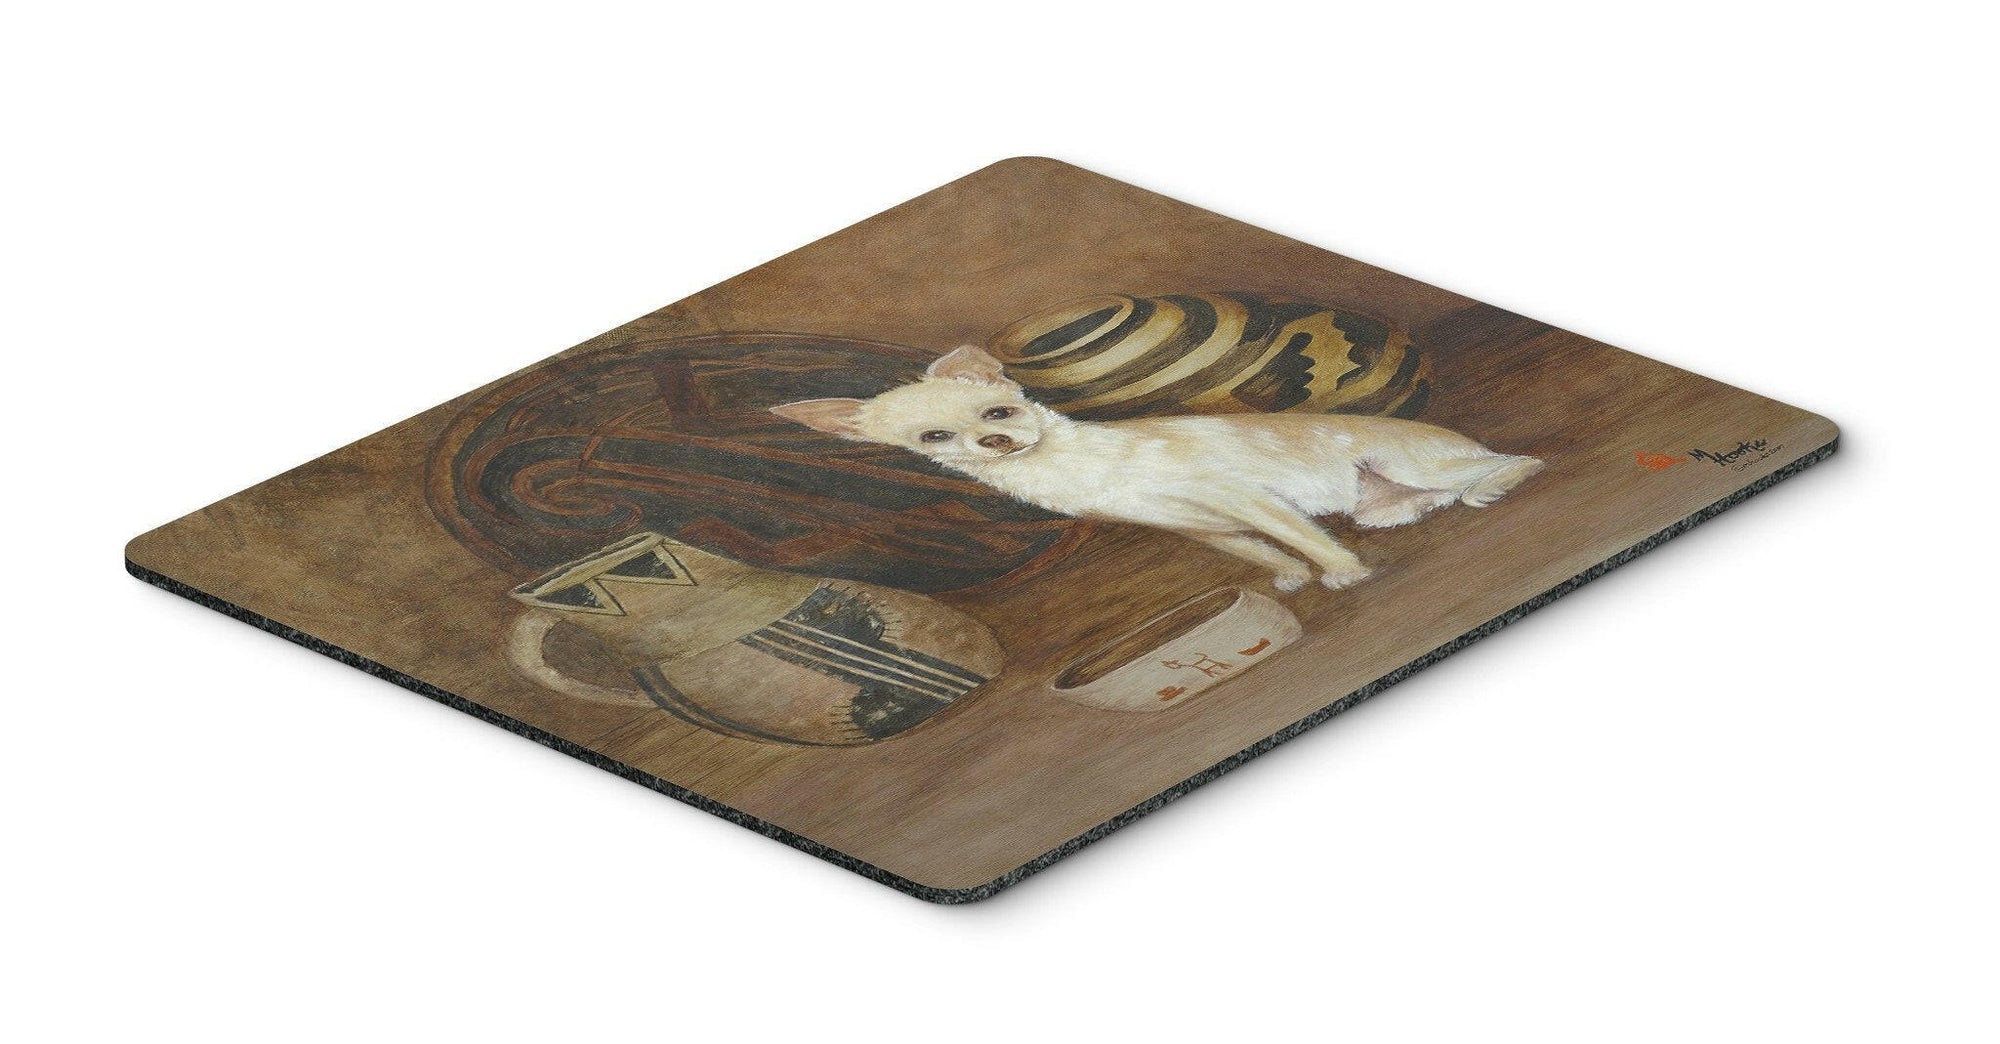 Chihuahua Ancient History Mouse Pad, Hot Pad or Trivet MH1043MP by Caroline's Treasures